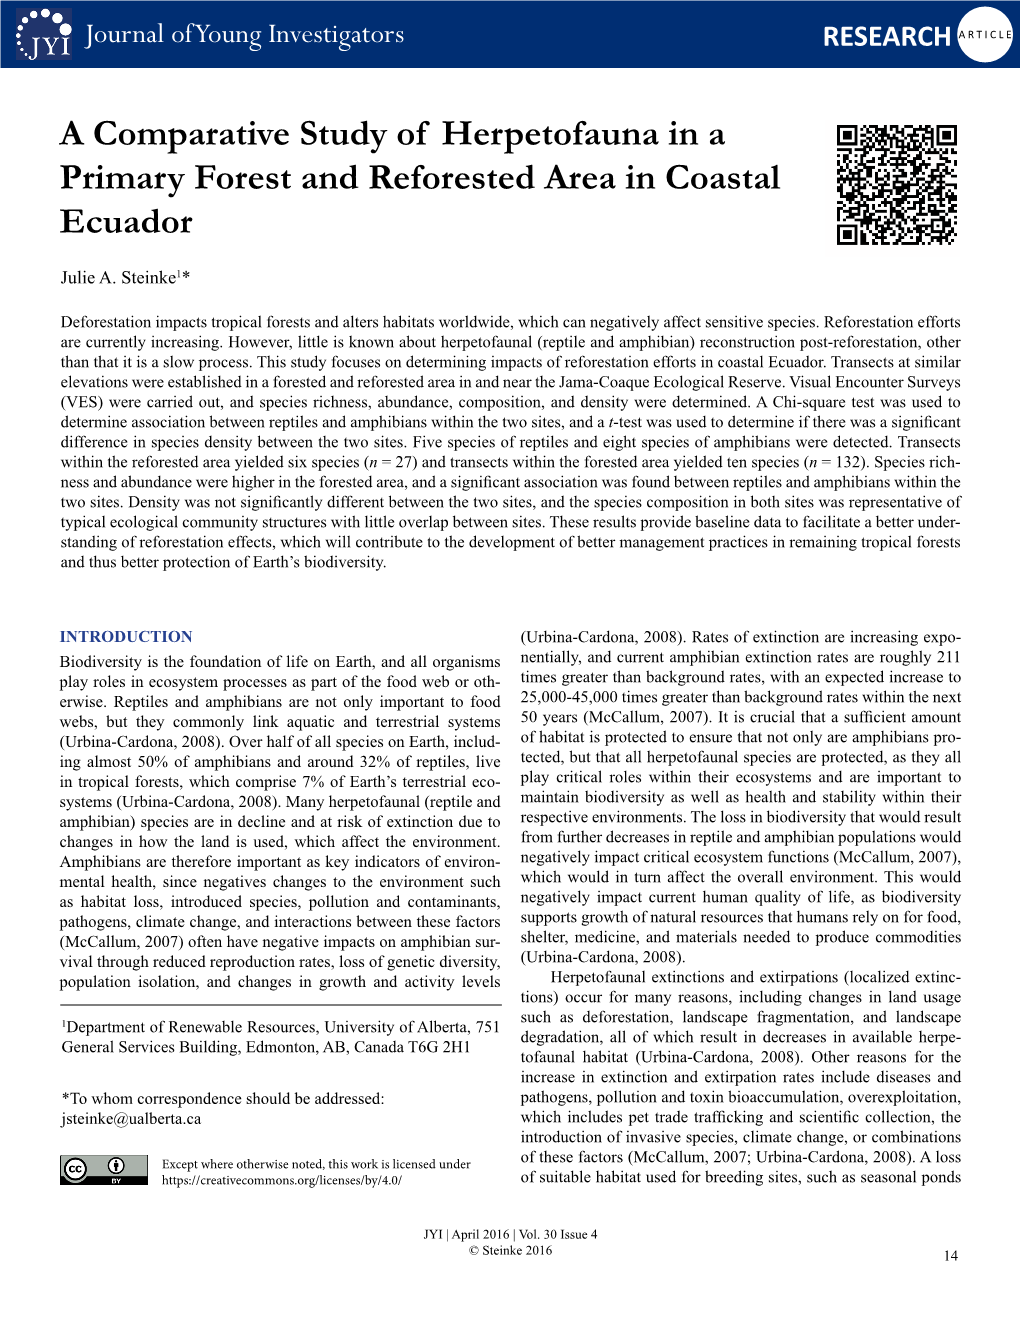 A Comparative Study of Herpetofauna in a Primary Forest and Reforested Area in Coastal Ecuador